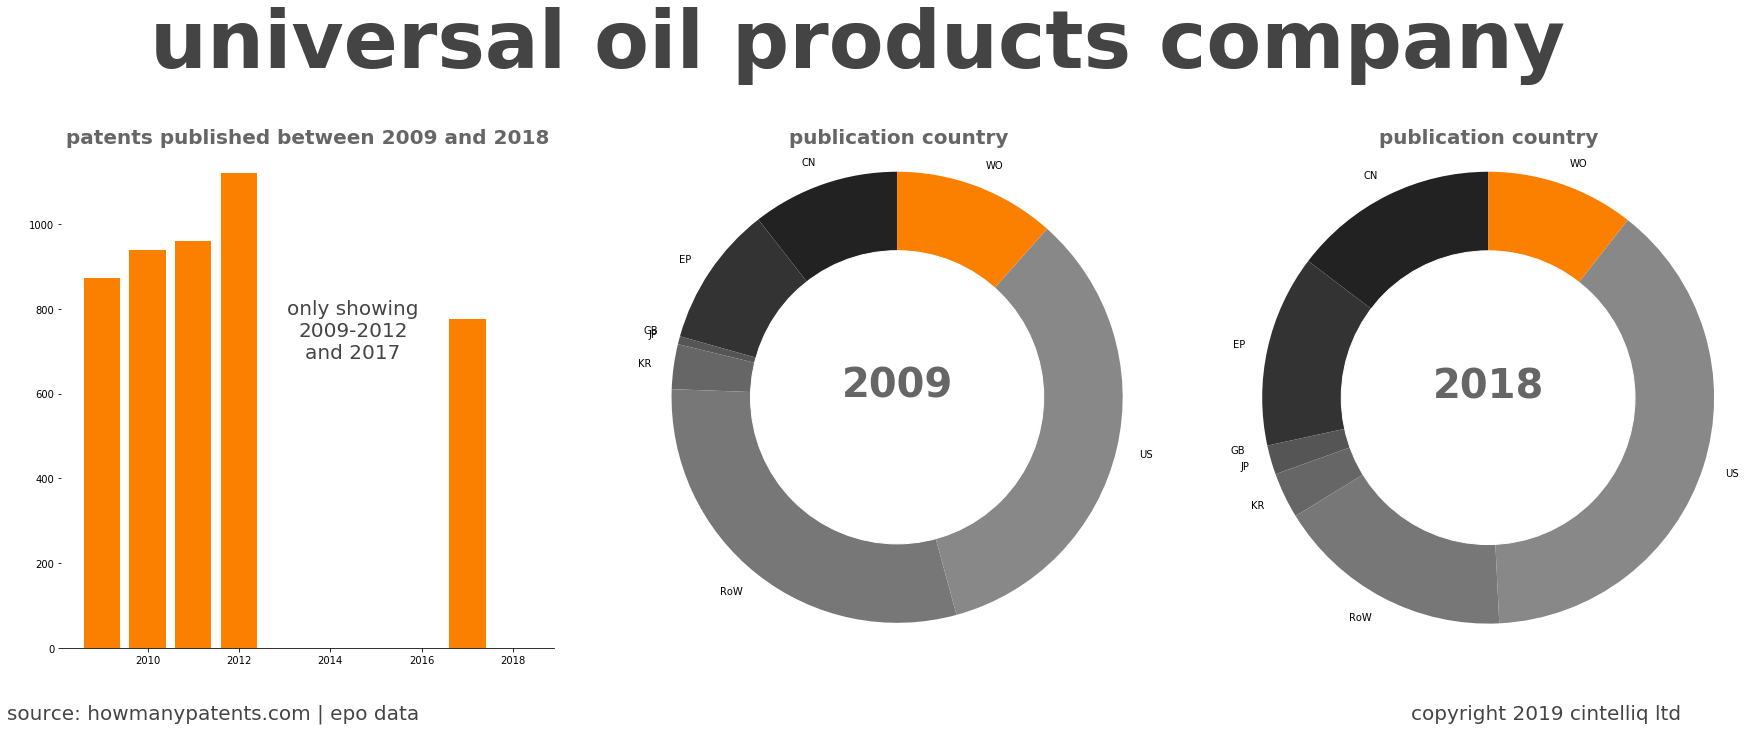 summary of patents for Universal Oil Products Company 